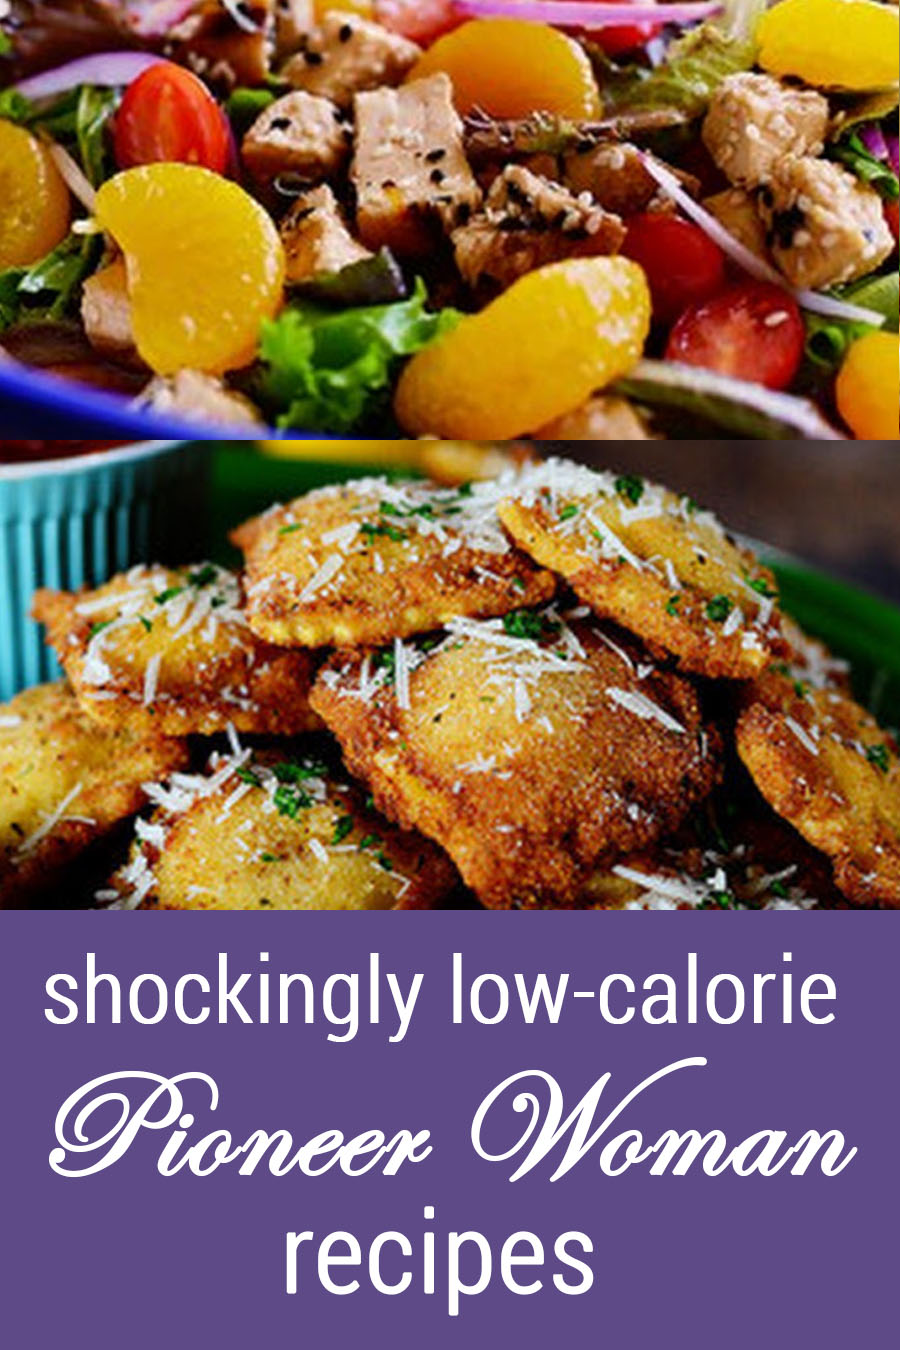 Shockingly low-calorie Pioneer Woman recipes